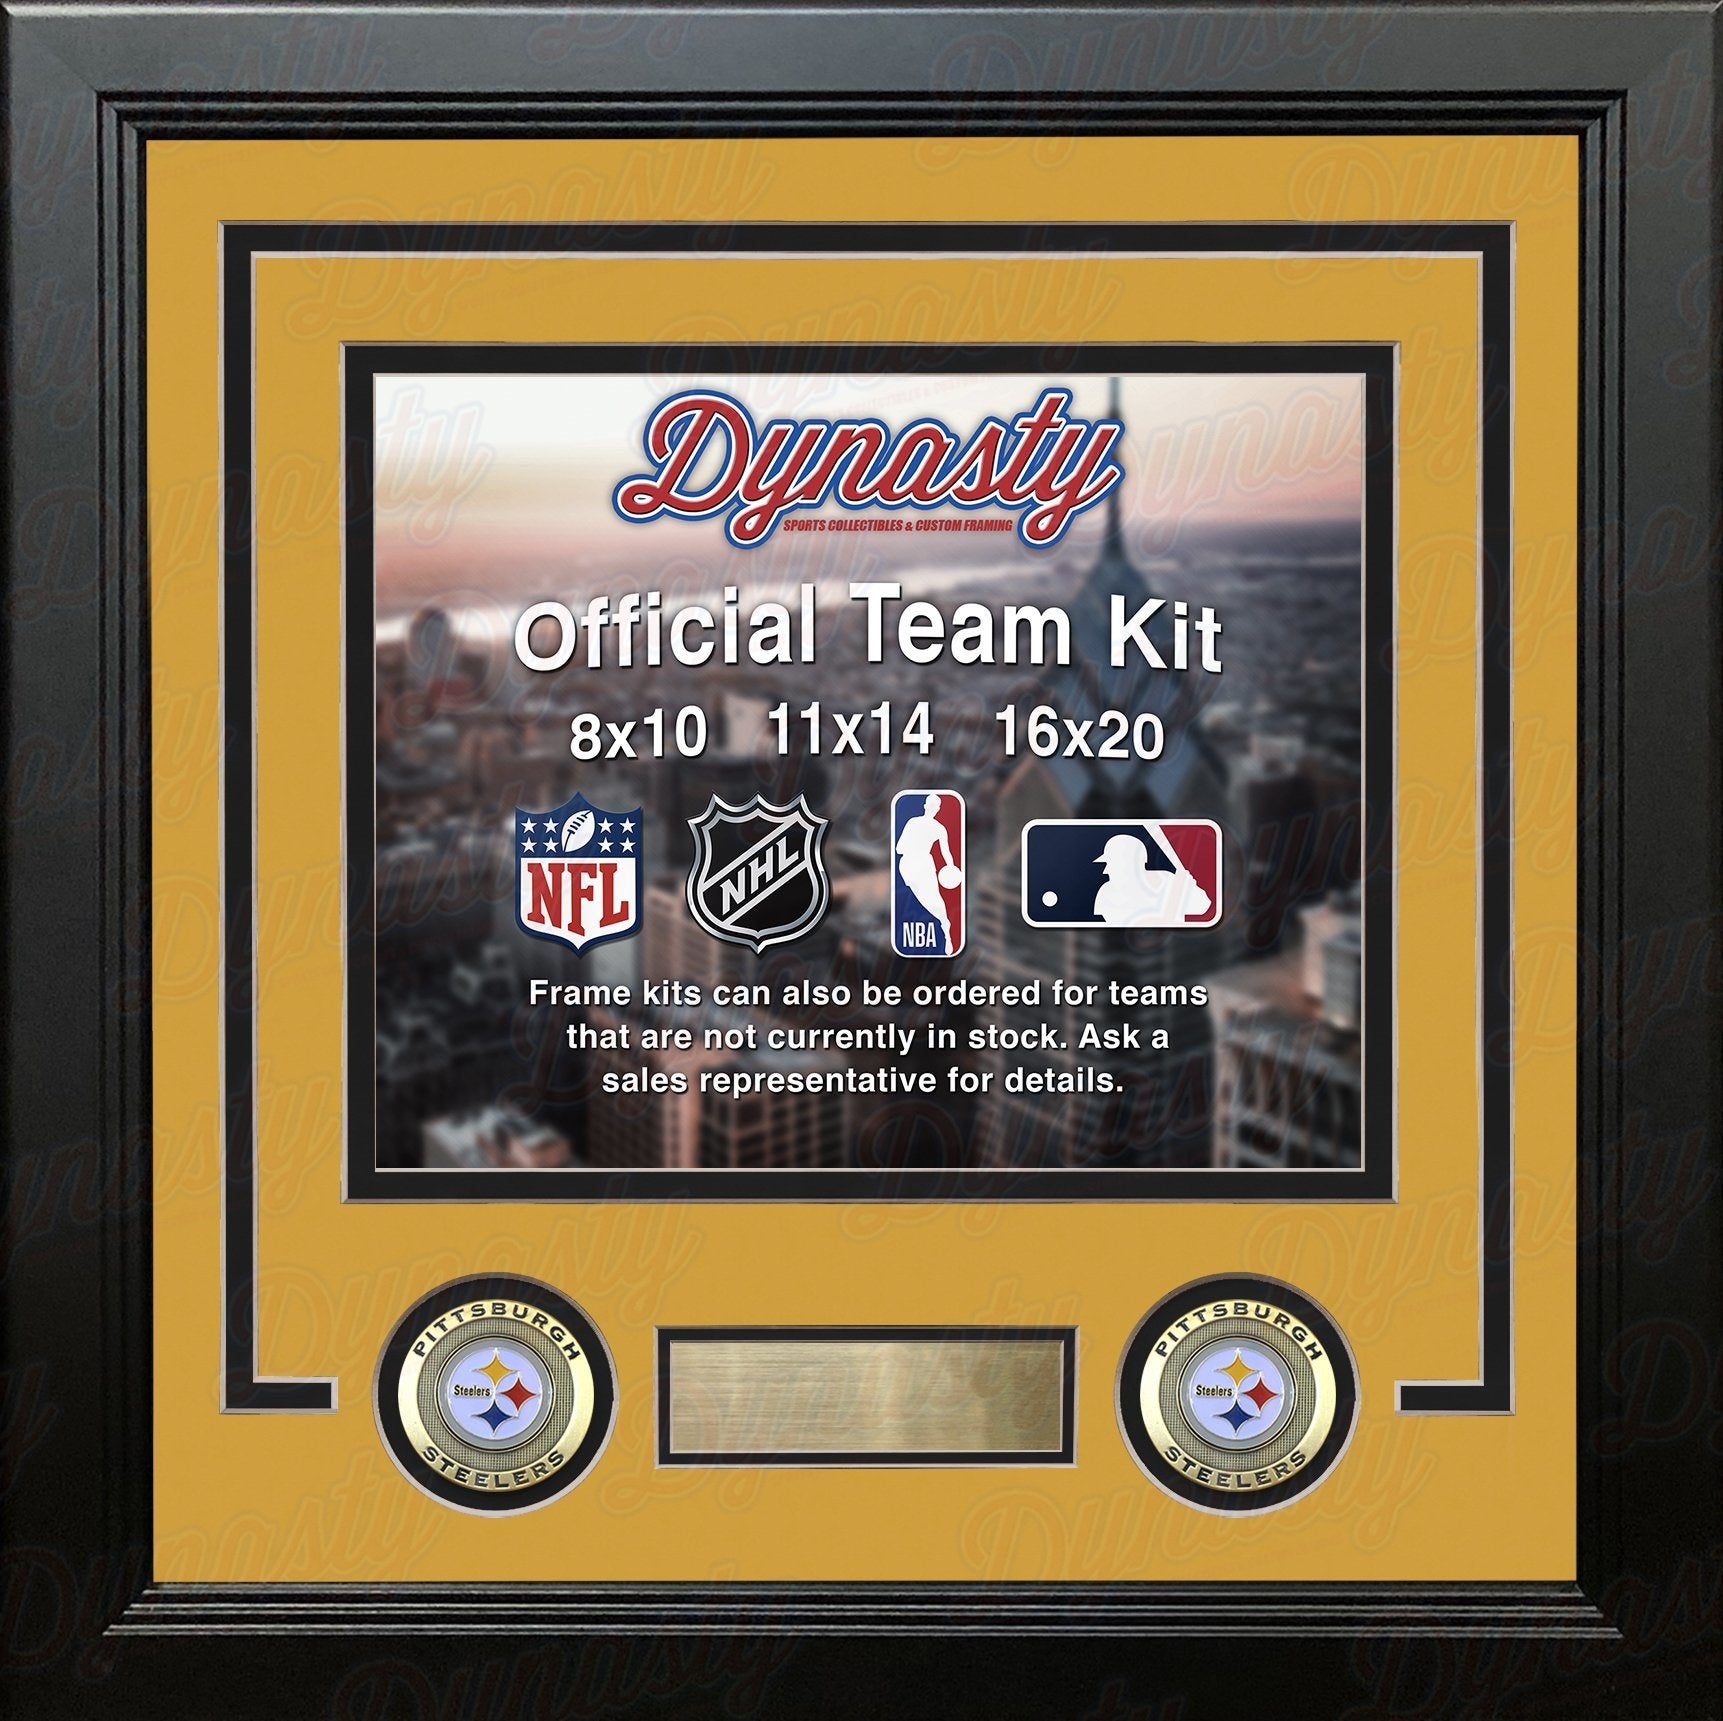 Pittsburgh Steelers Custom NFL Football 8x10 Picture Frame Kit (Multiple Colors) - Dynasty Sports & Framing 